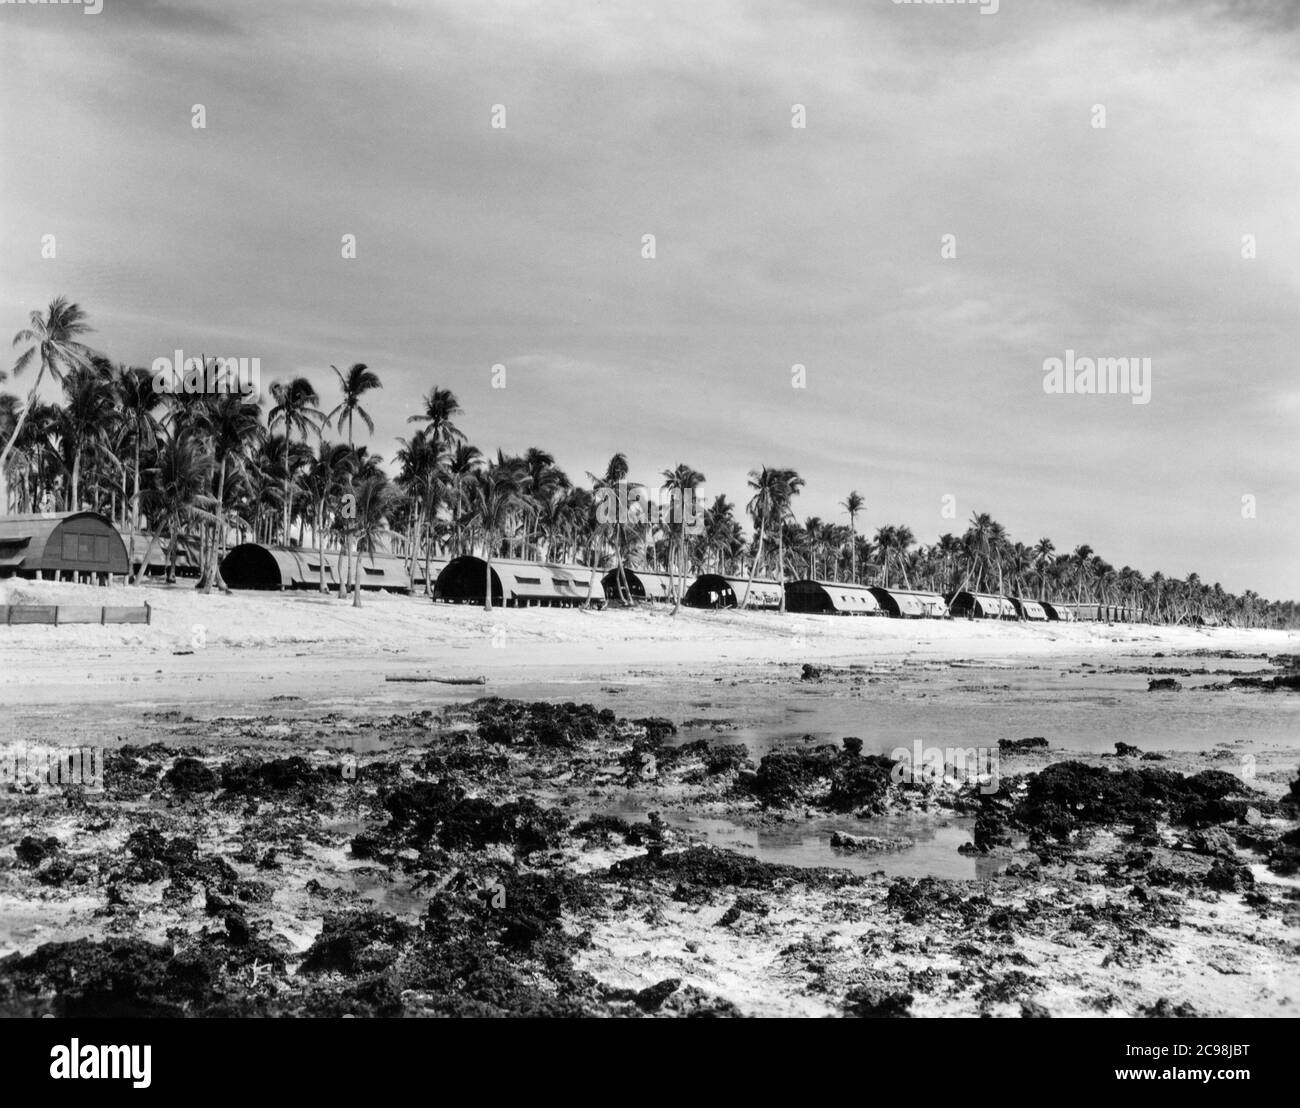 Quonset huts on the beach. Camp Dealey Submarine Recuperation Camp. Guam, July 1945. As the 75th anniversary of V-J Day approaches, The Consoli Collection has published four photo essays by U.S. Navy Lt. (j.g.) Joseph J. Consoli. The photos were taken between July and December 1945 in the Mariana Islands. They document U.S. Navy life before and after the Japanese surrender. Stock Photo